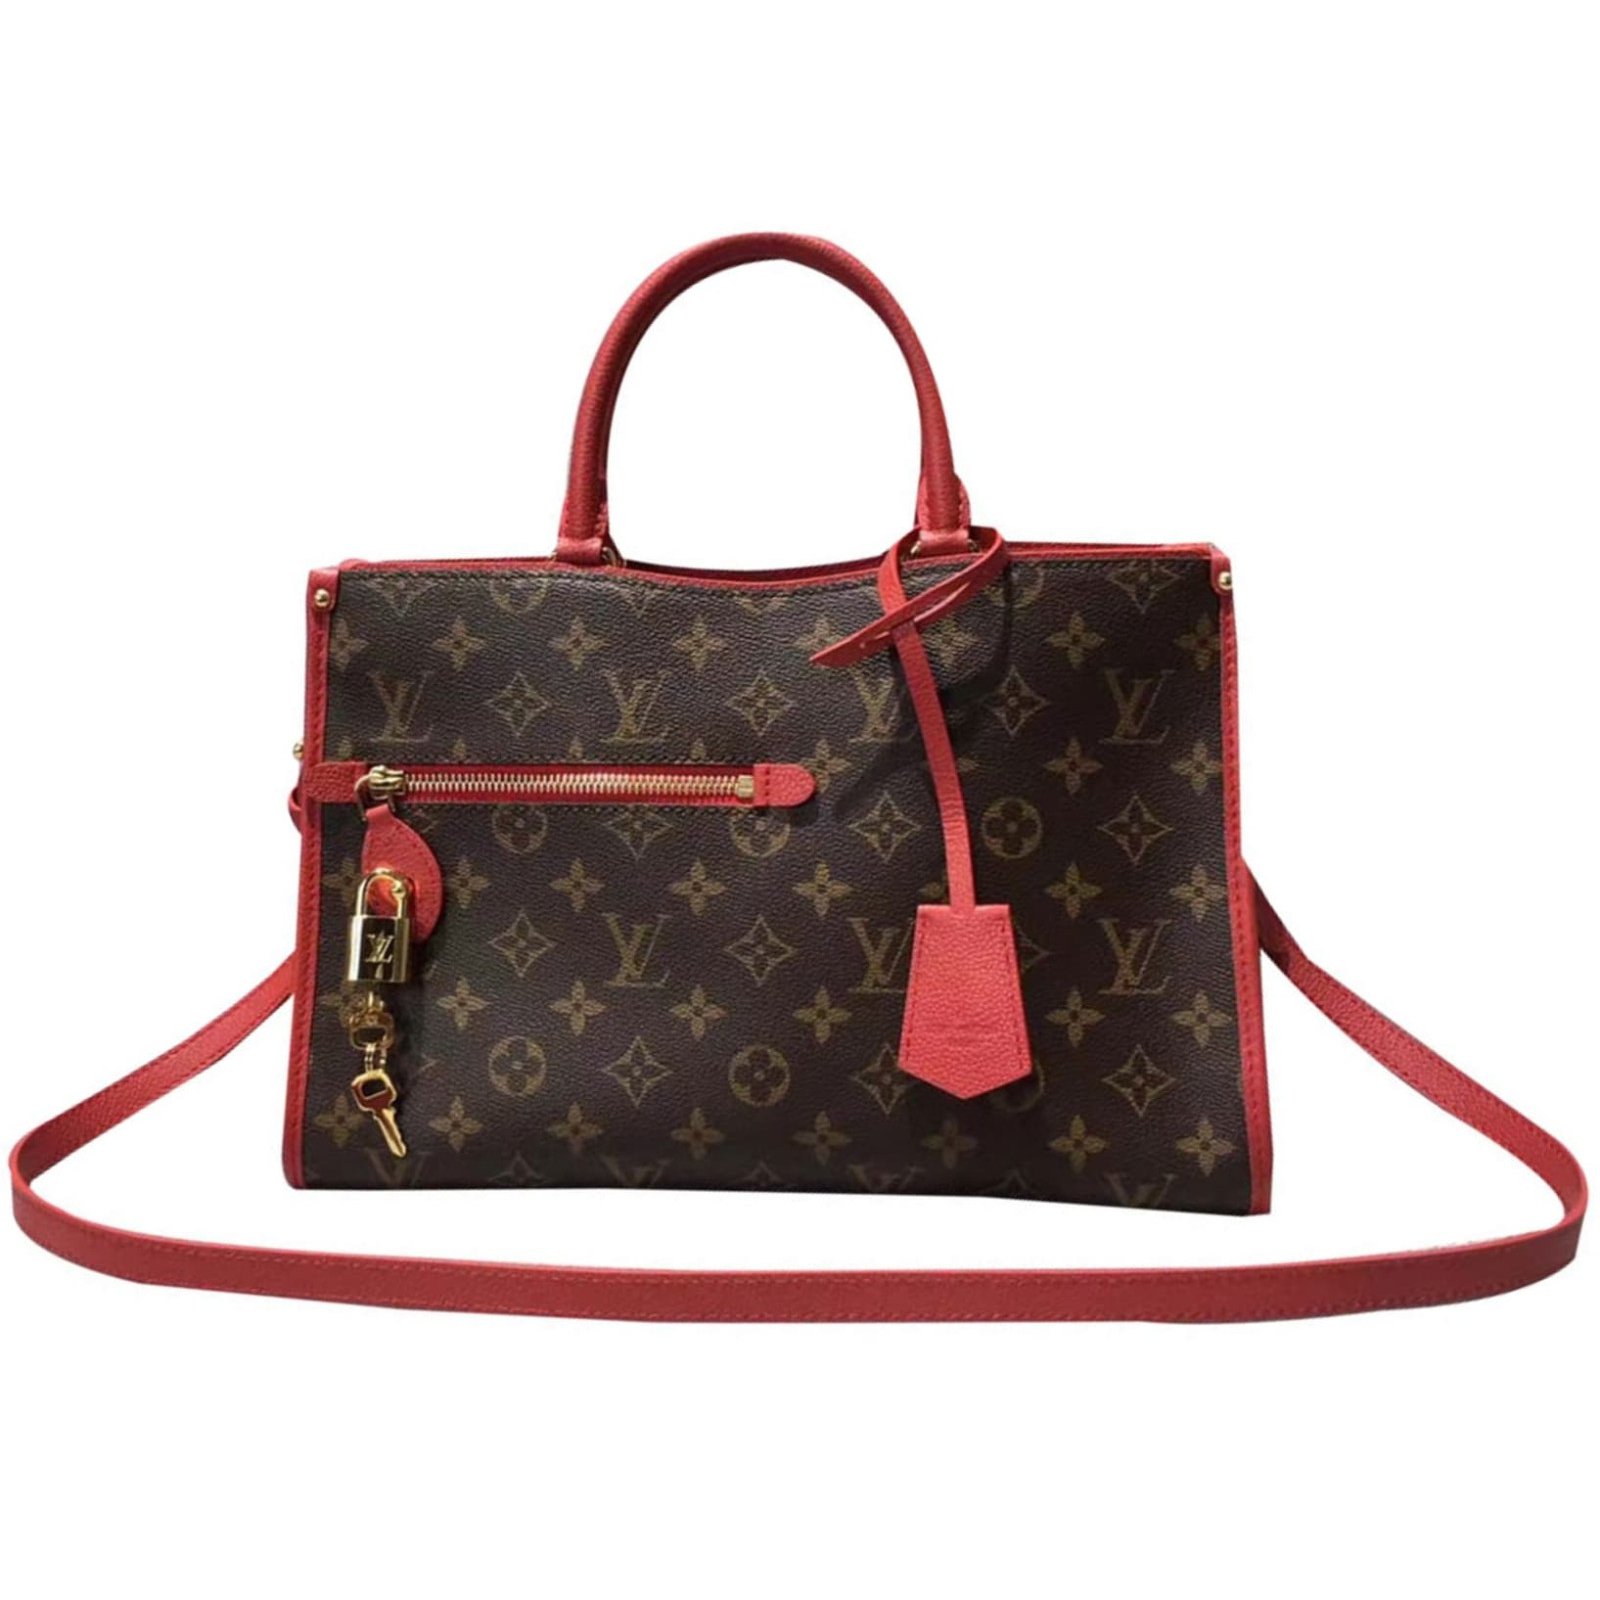 Red Lv Purse | Confederated Tribes of the Umatilla Indian Reservation